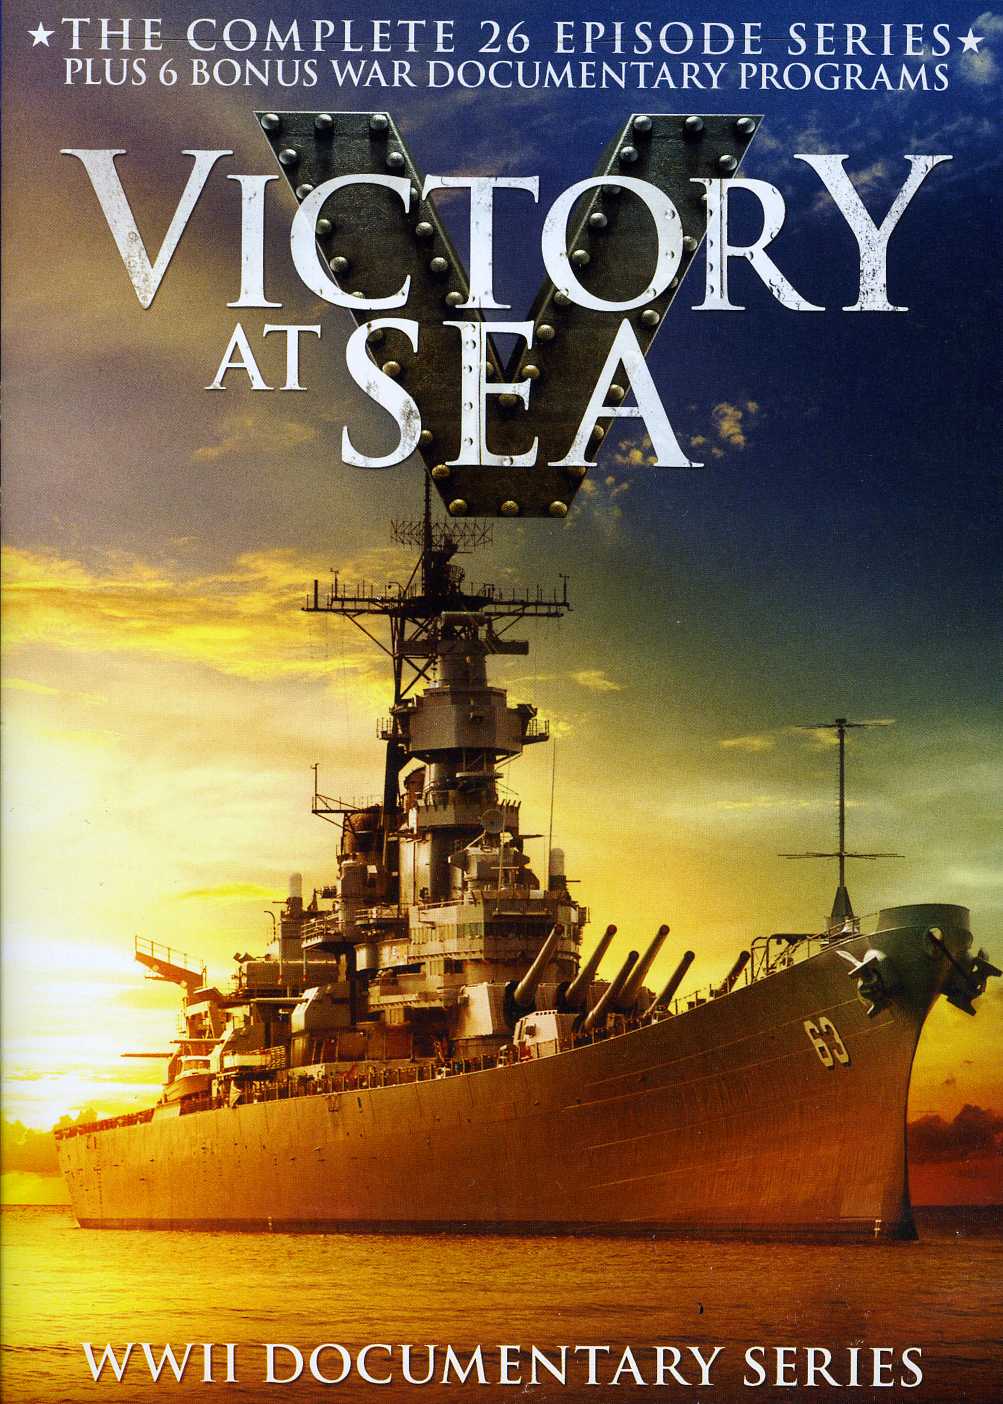 VICTORY AT SEA - THE COMPLETE 26 EPISODE SERIES